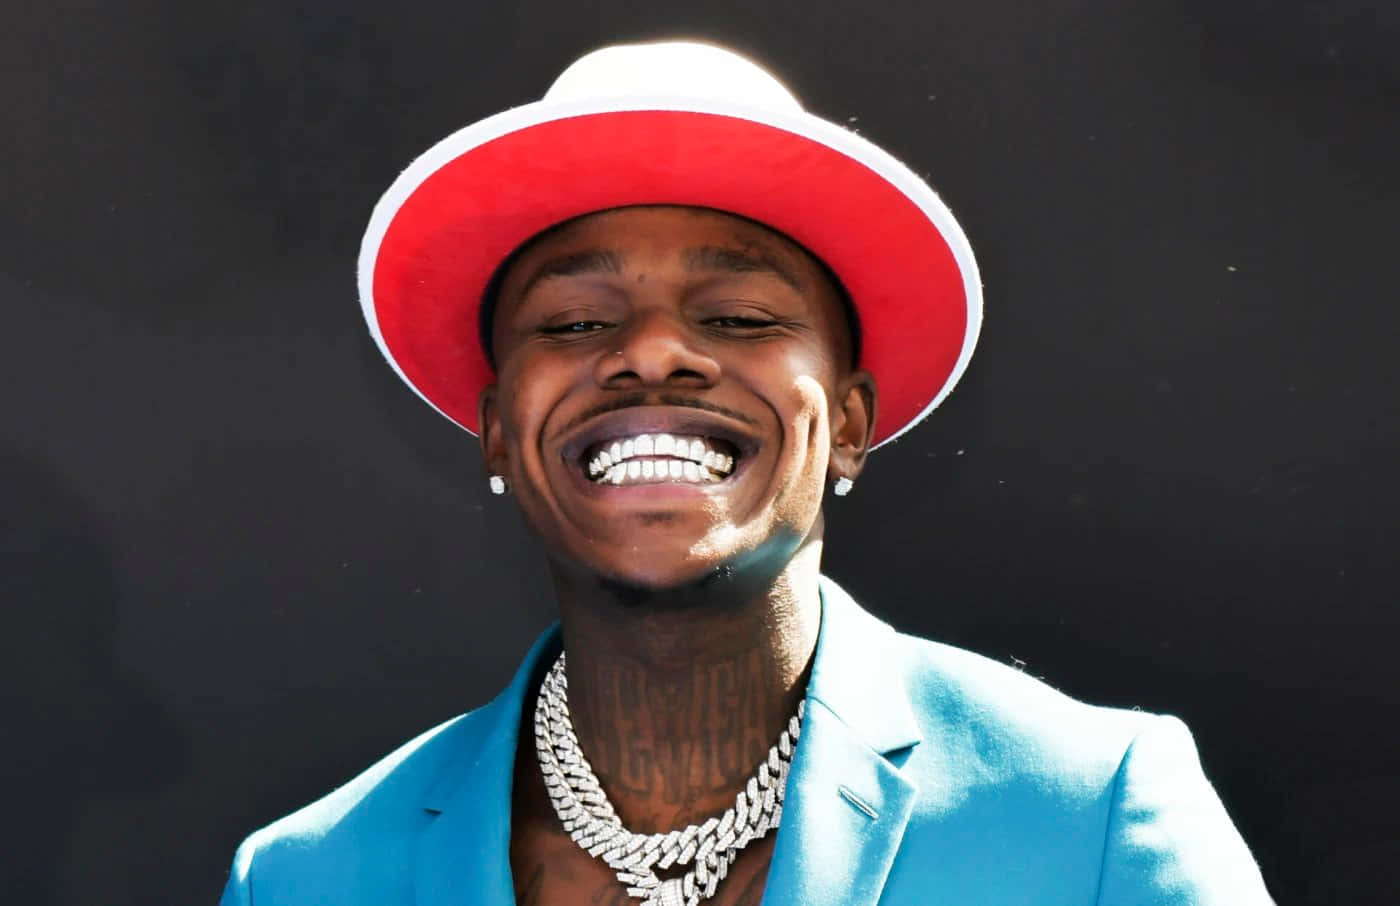 DaBaby performs on stage with powerful energy